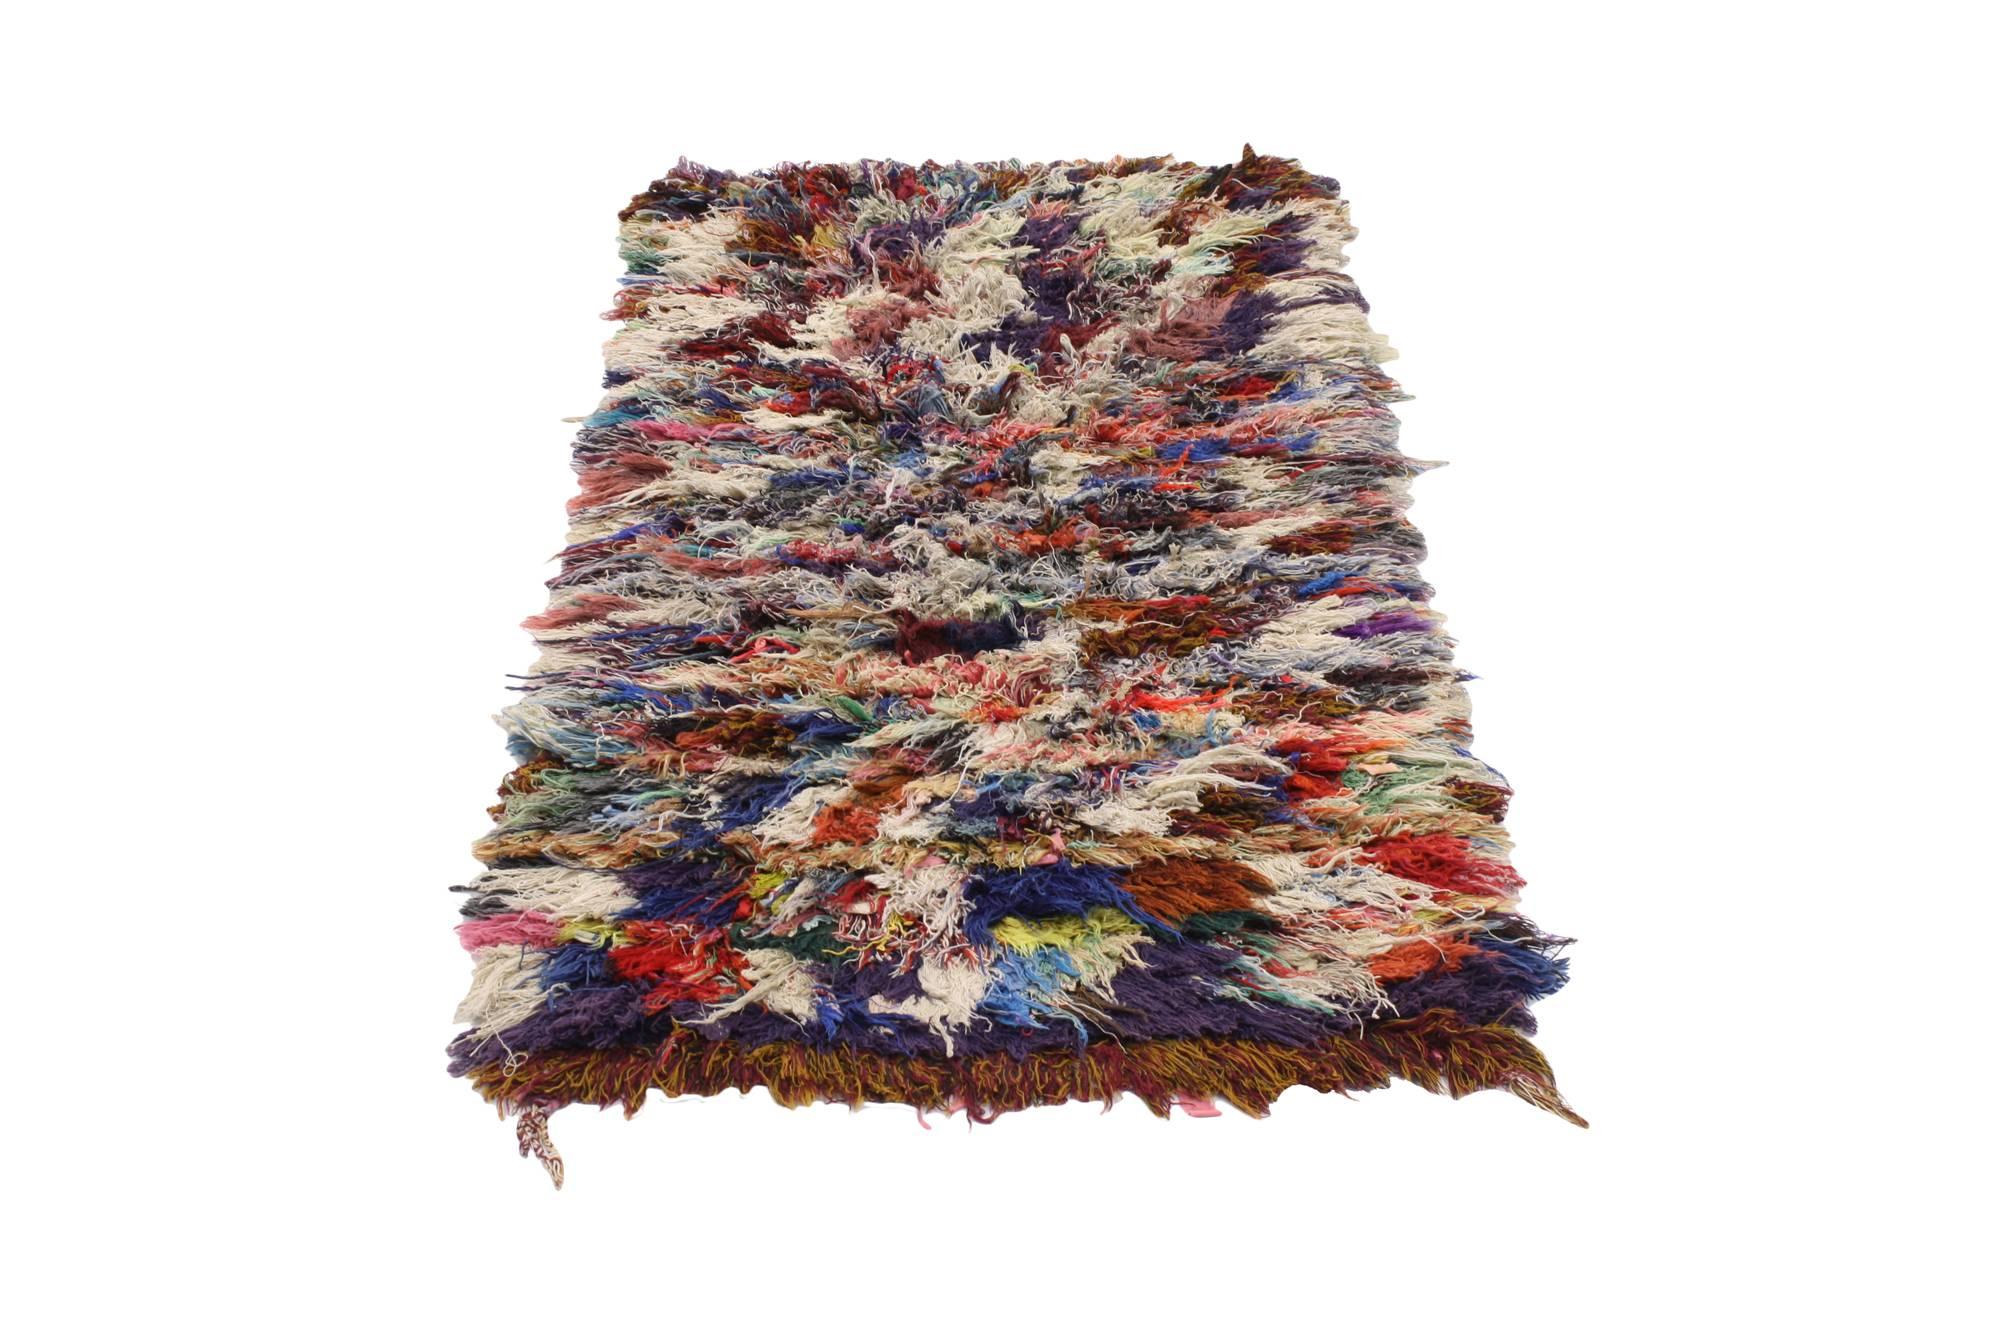 20501, vintage Berber Moroccan Boucherouite rug, shag accent rug. Infuse wanderlust and tribal style with this vintage Berber Moroccan Boucherouite rug. An array of colors unite creating dimension and texture. This one of a kind rug is woven